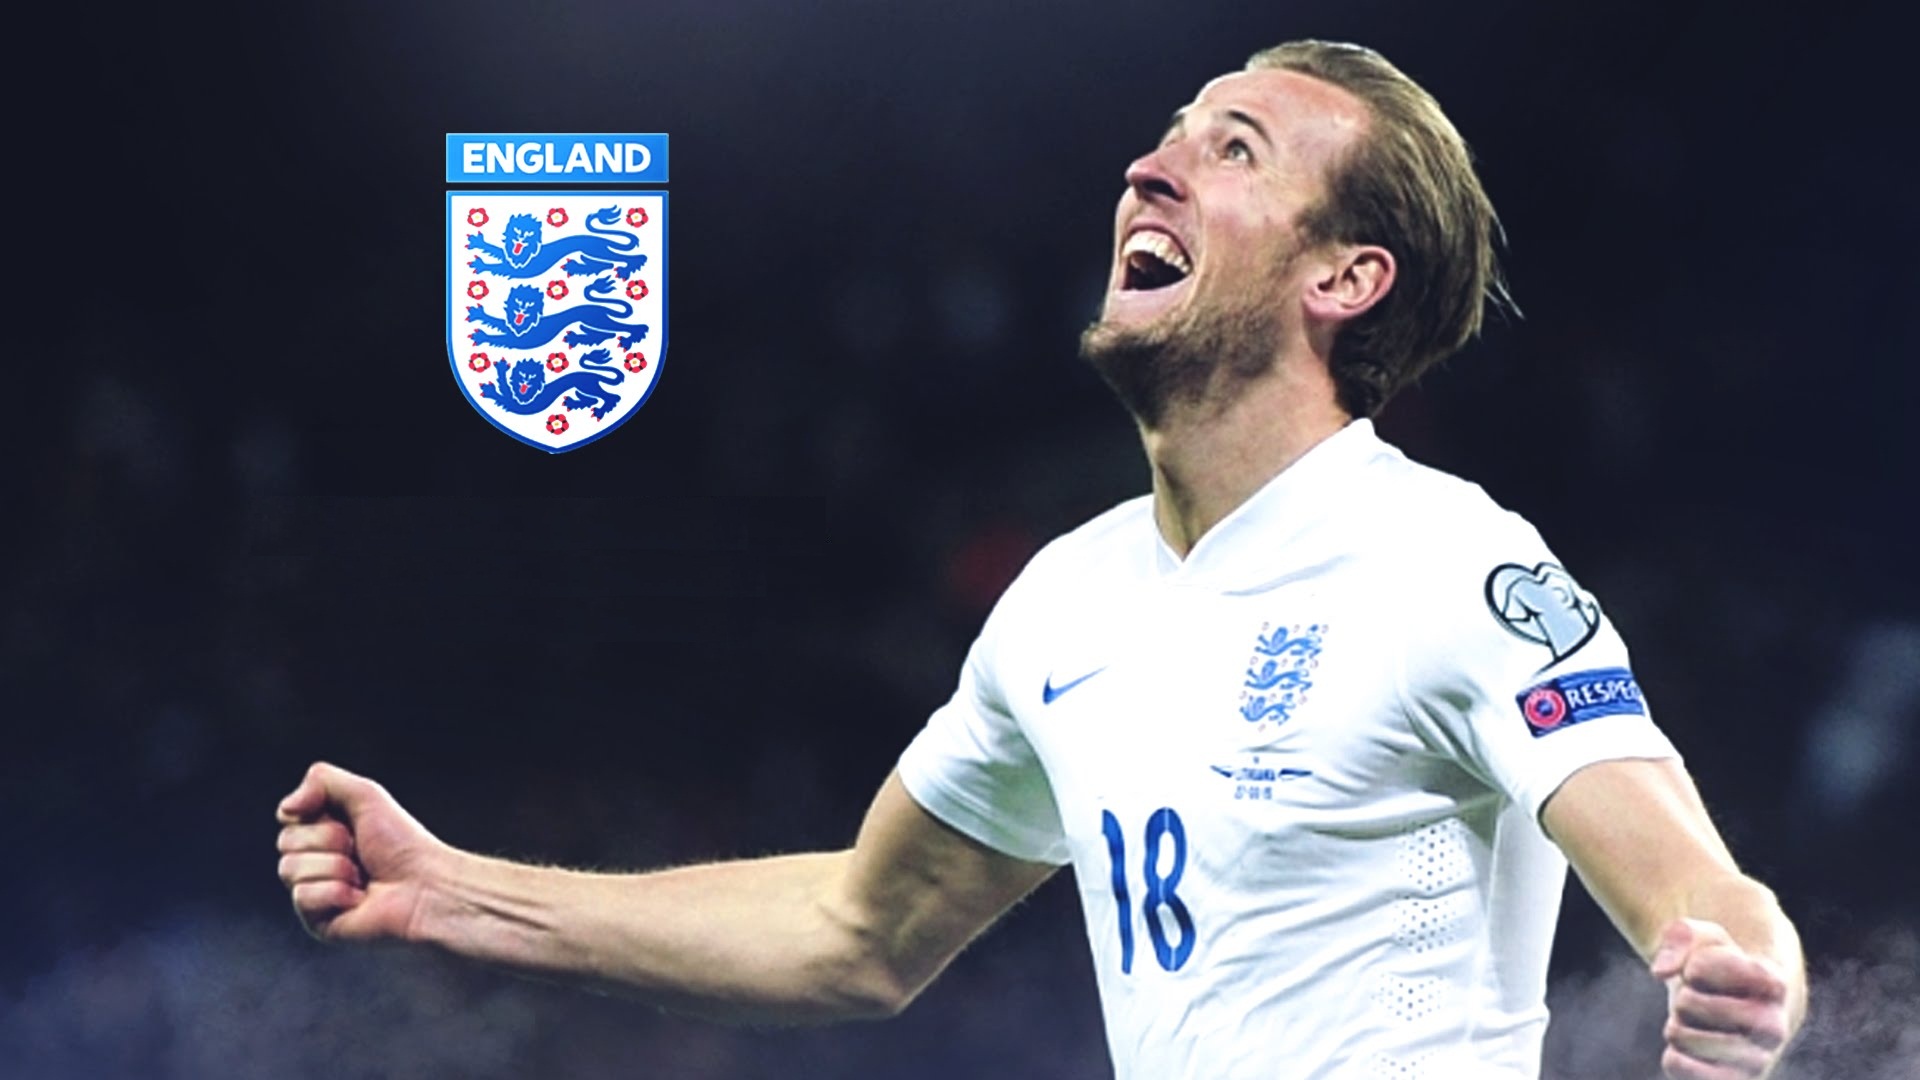 England Soccer Wallpaper HD With Resolution 1920X1080 pixel. You can make this wallpaper for your Mac or Windows Desktop Background, iPhone, Android or Tablet and another Smartphone device for free